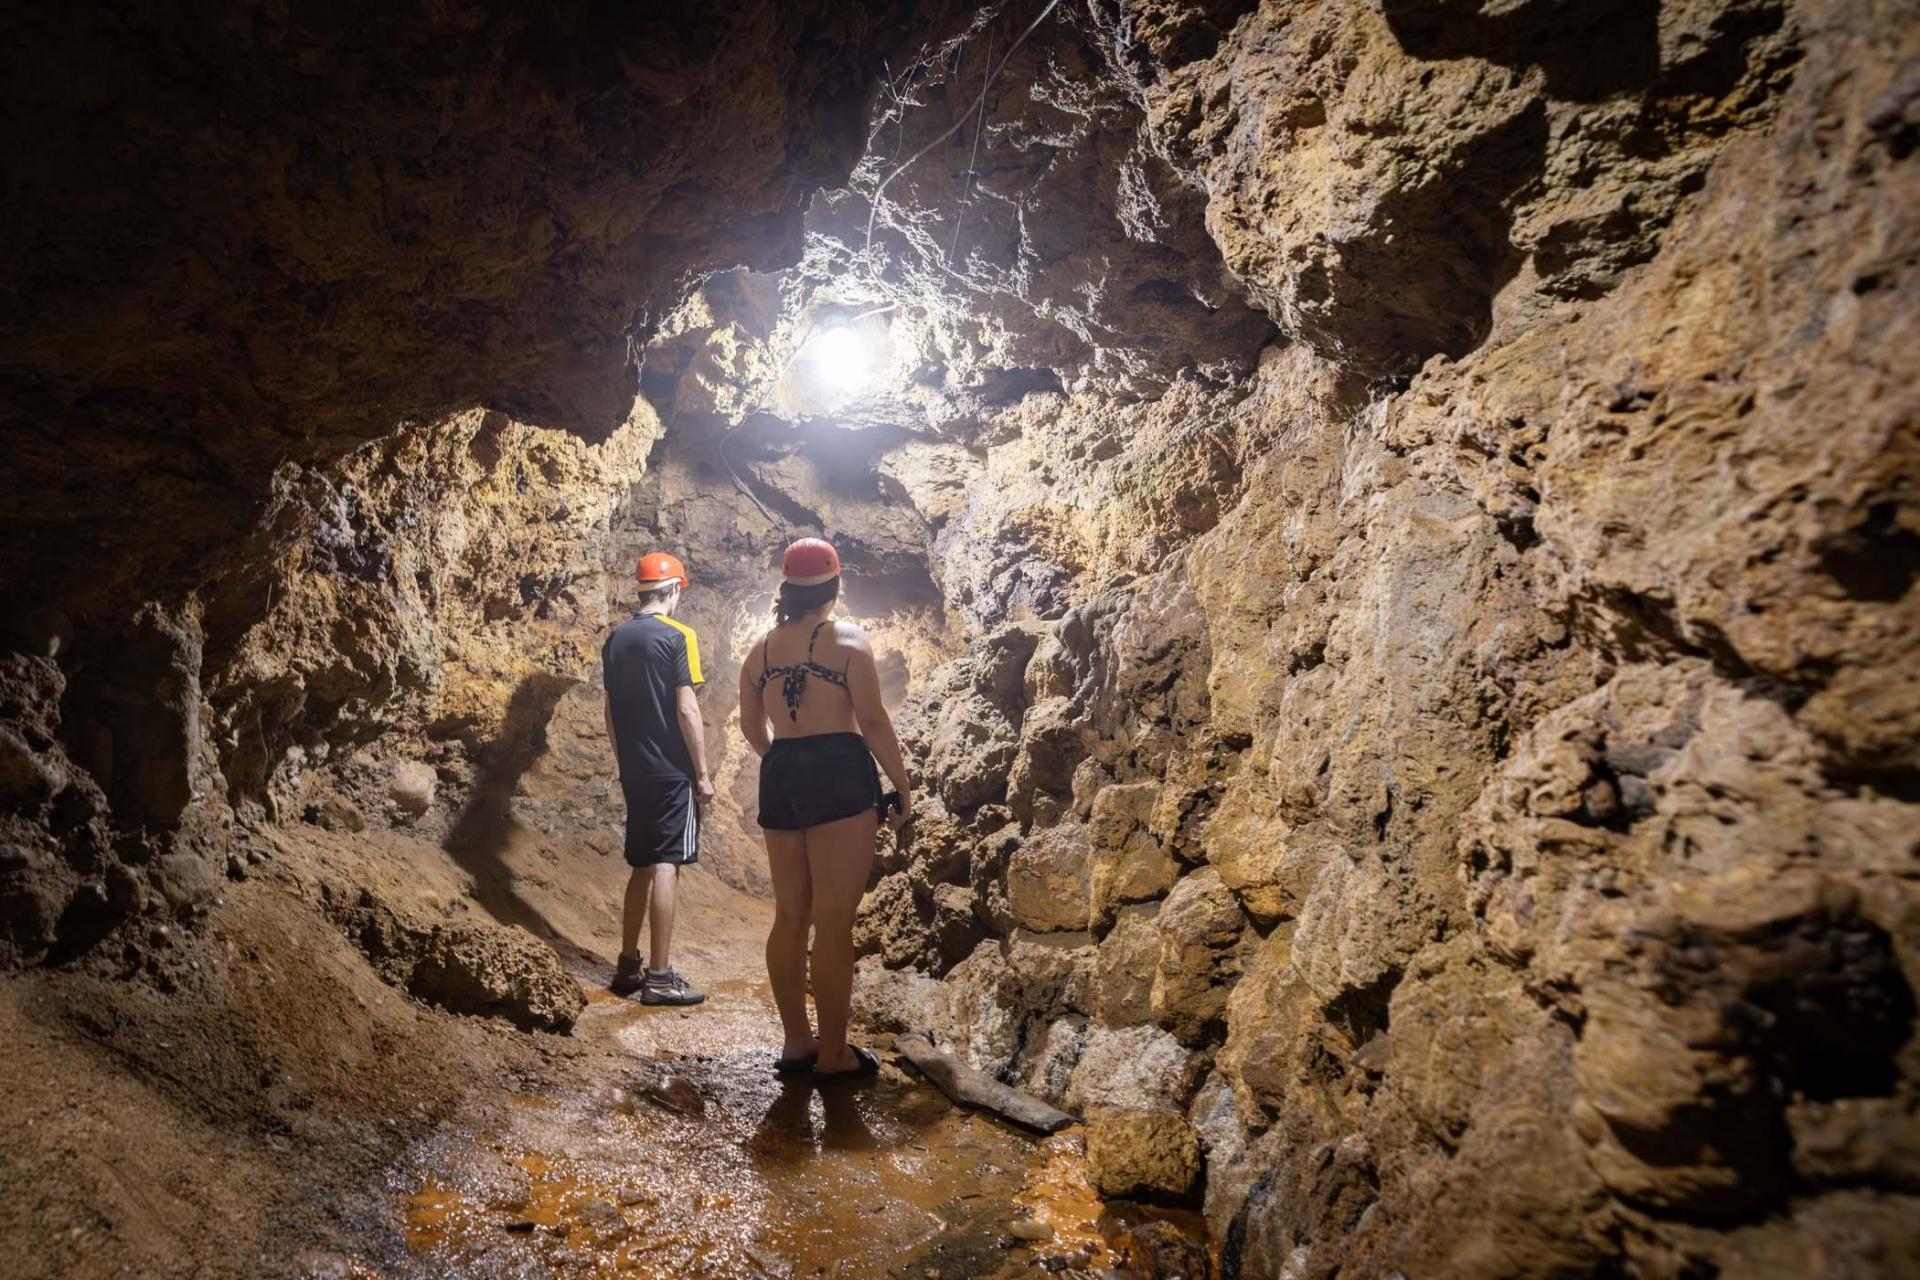 Two people exploring Bear Cave.